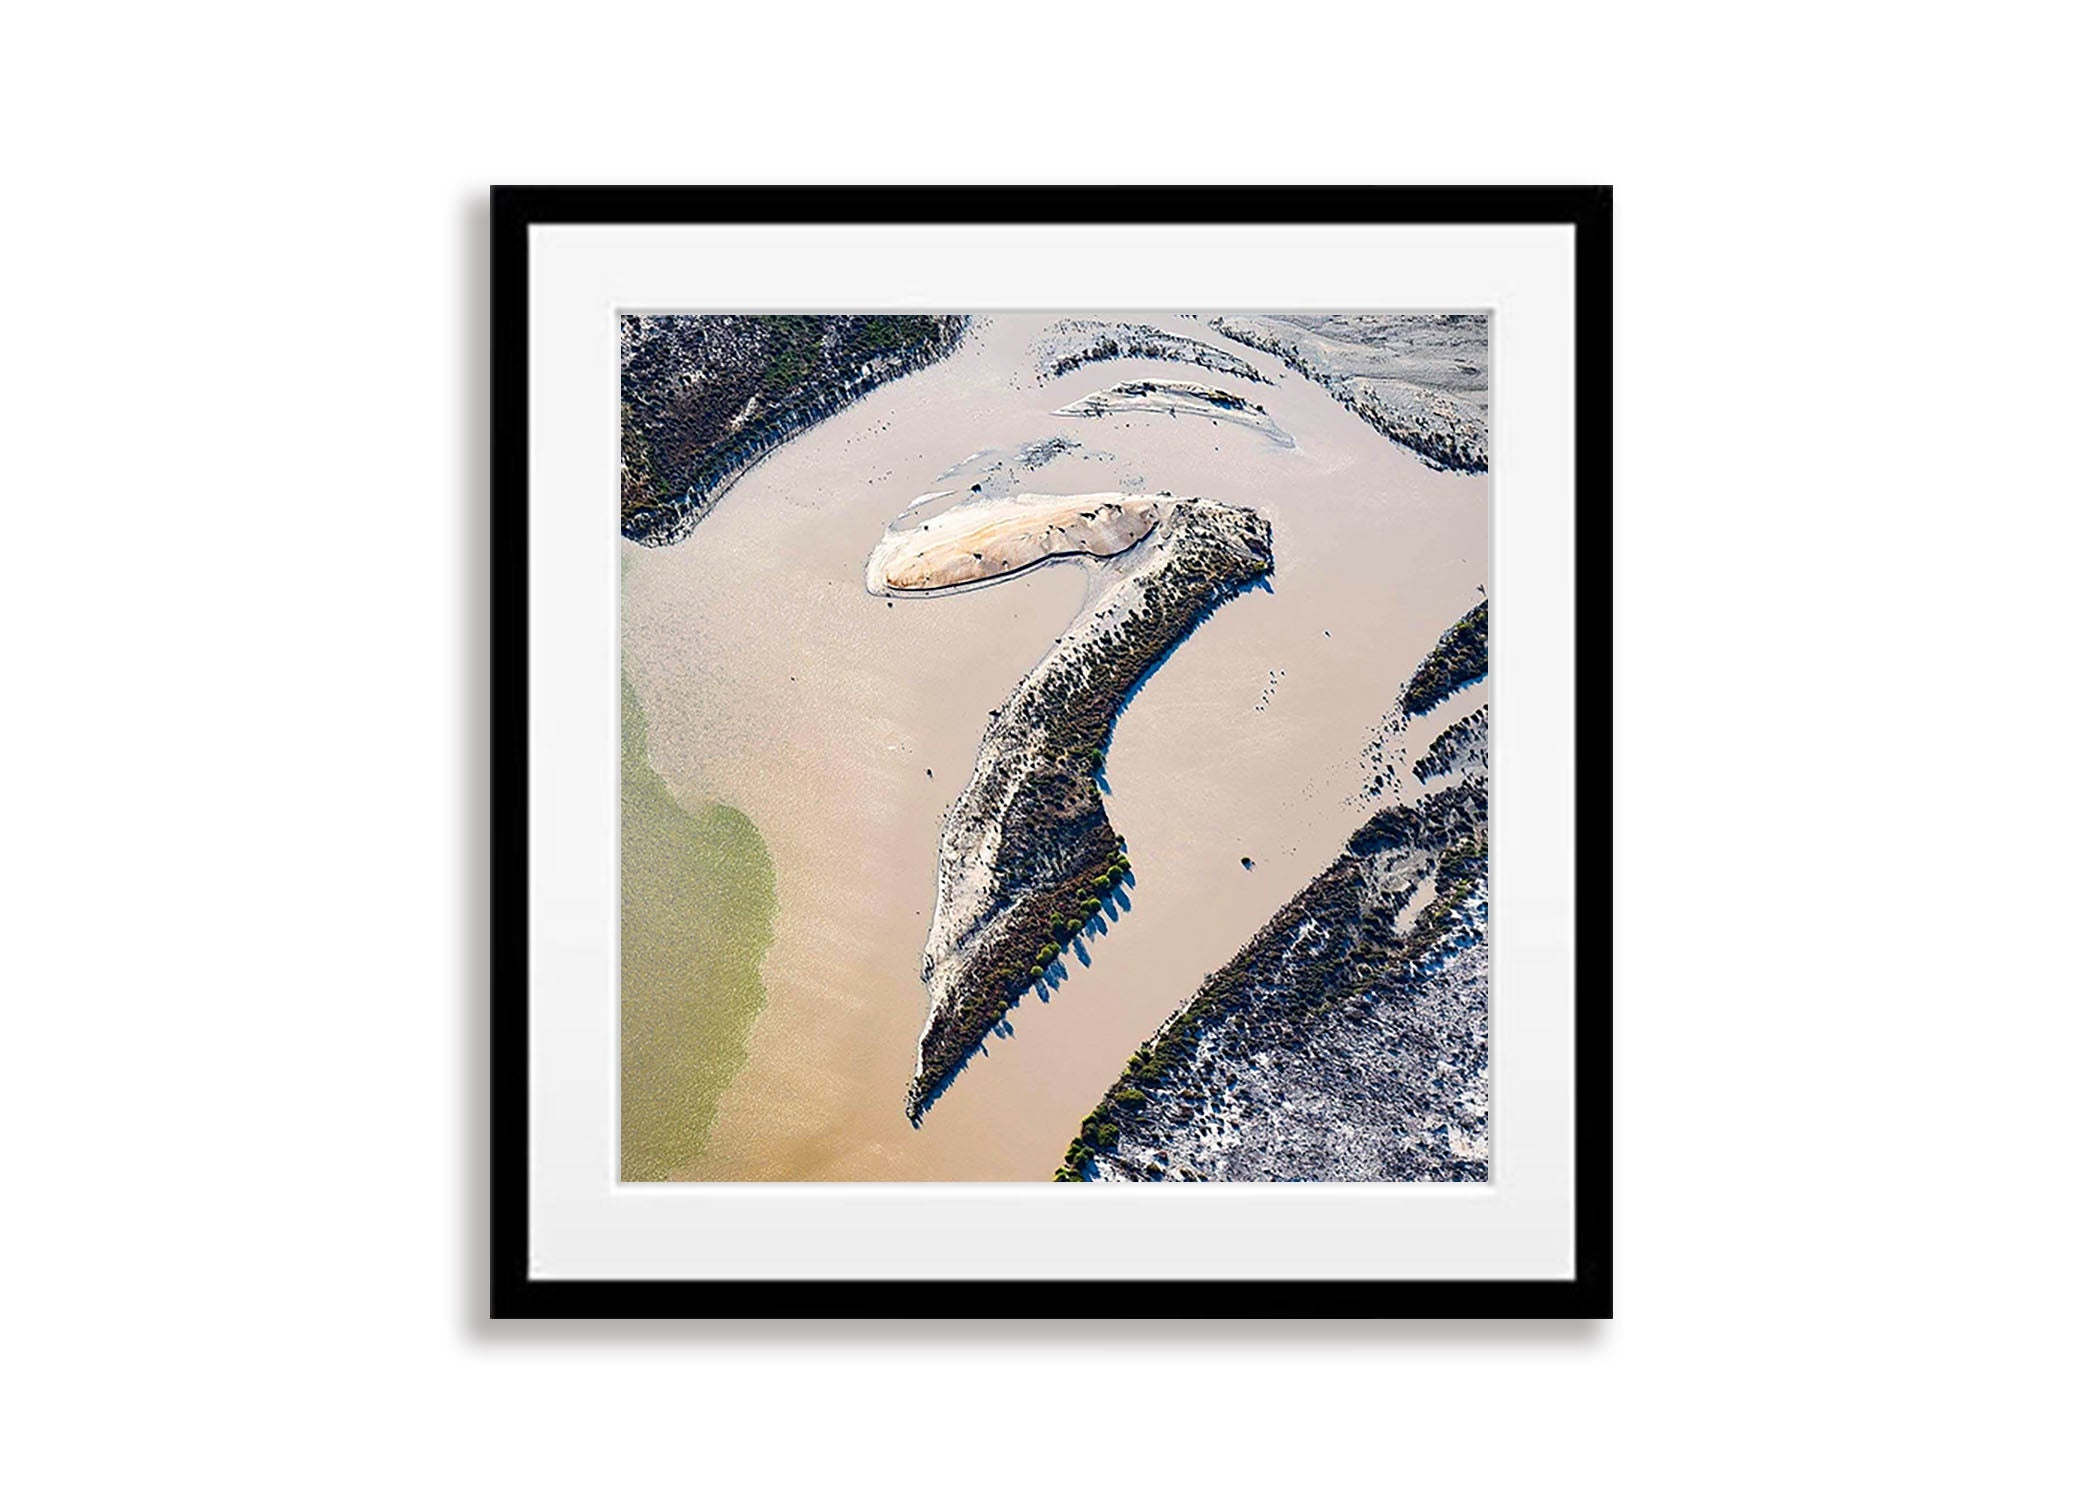 ARTWORK INSTOCK - 'Seven' - Available 150 x 150cms Mounted Print (ready to frame) in the gallery TODAY!